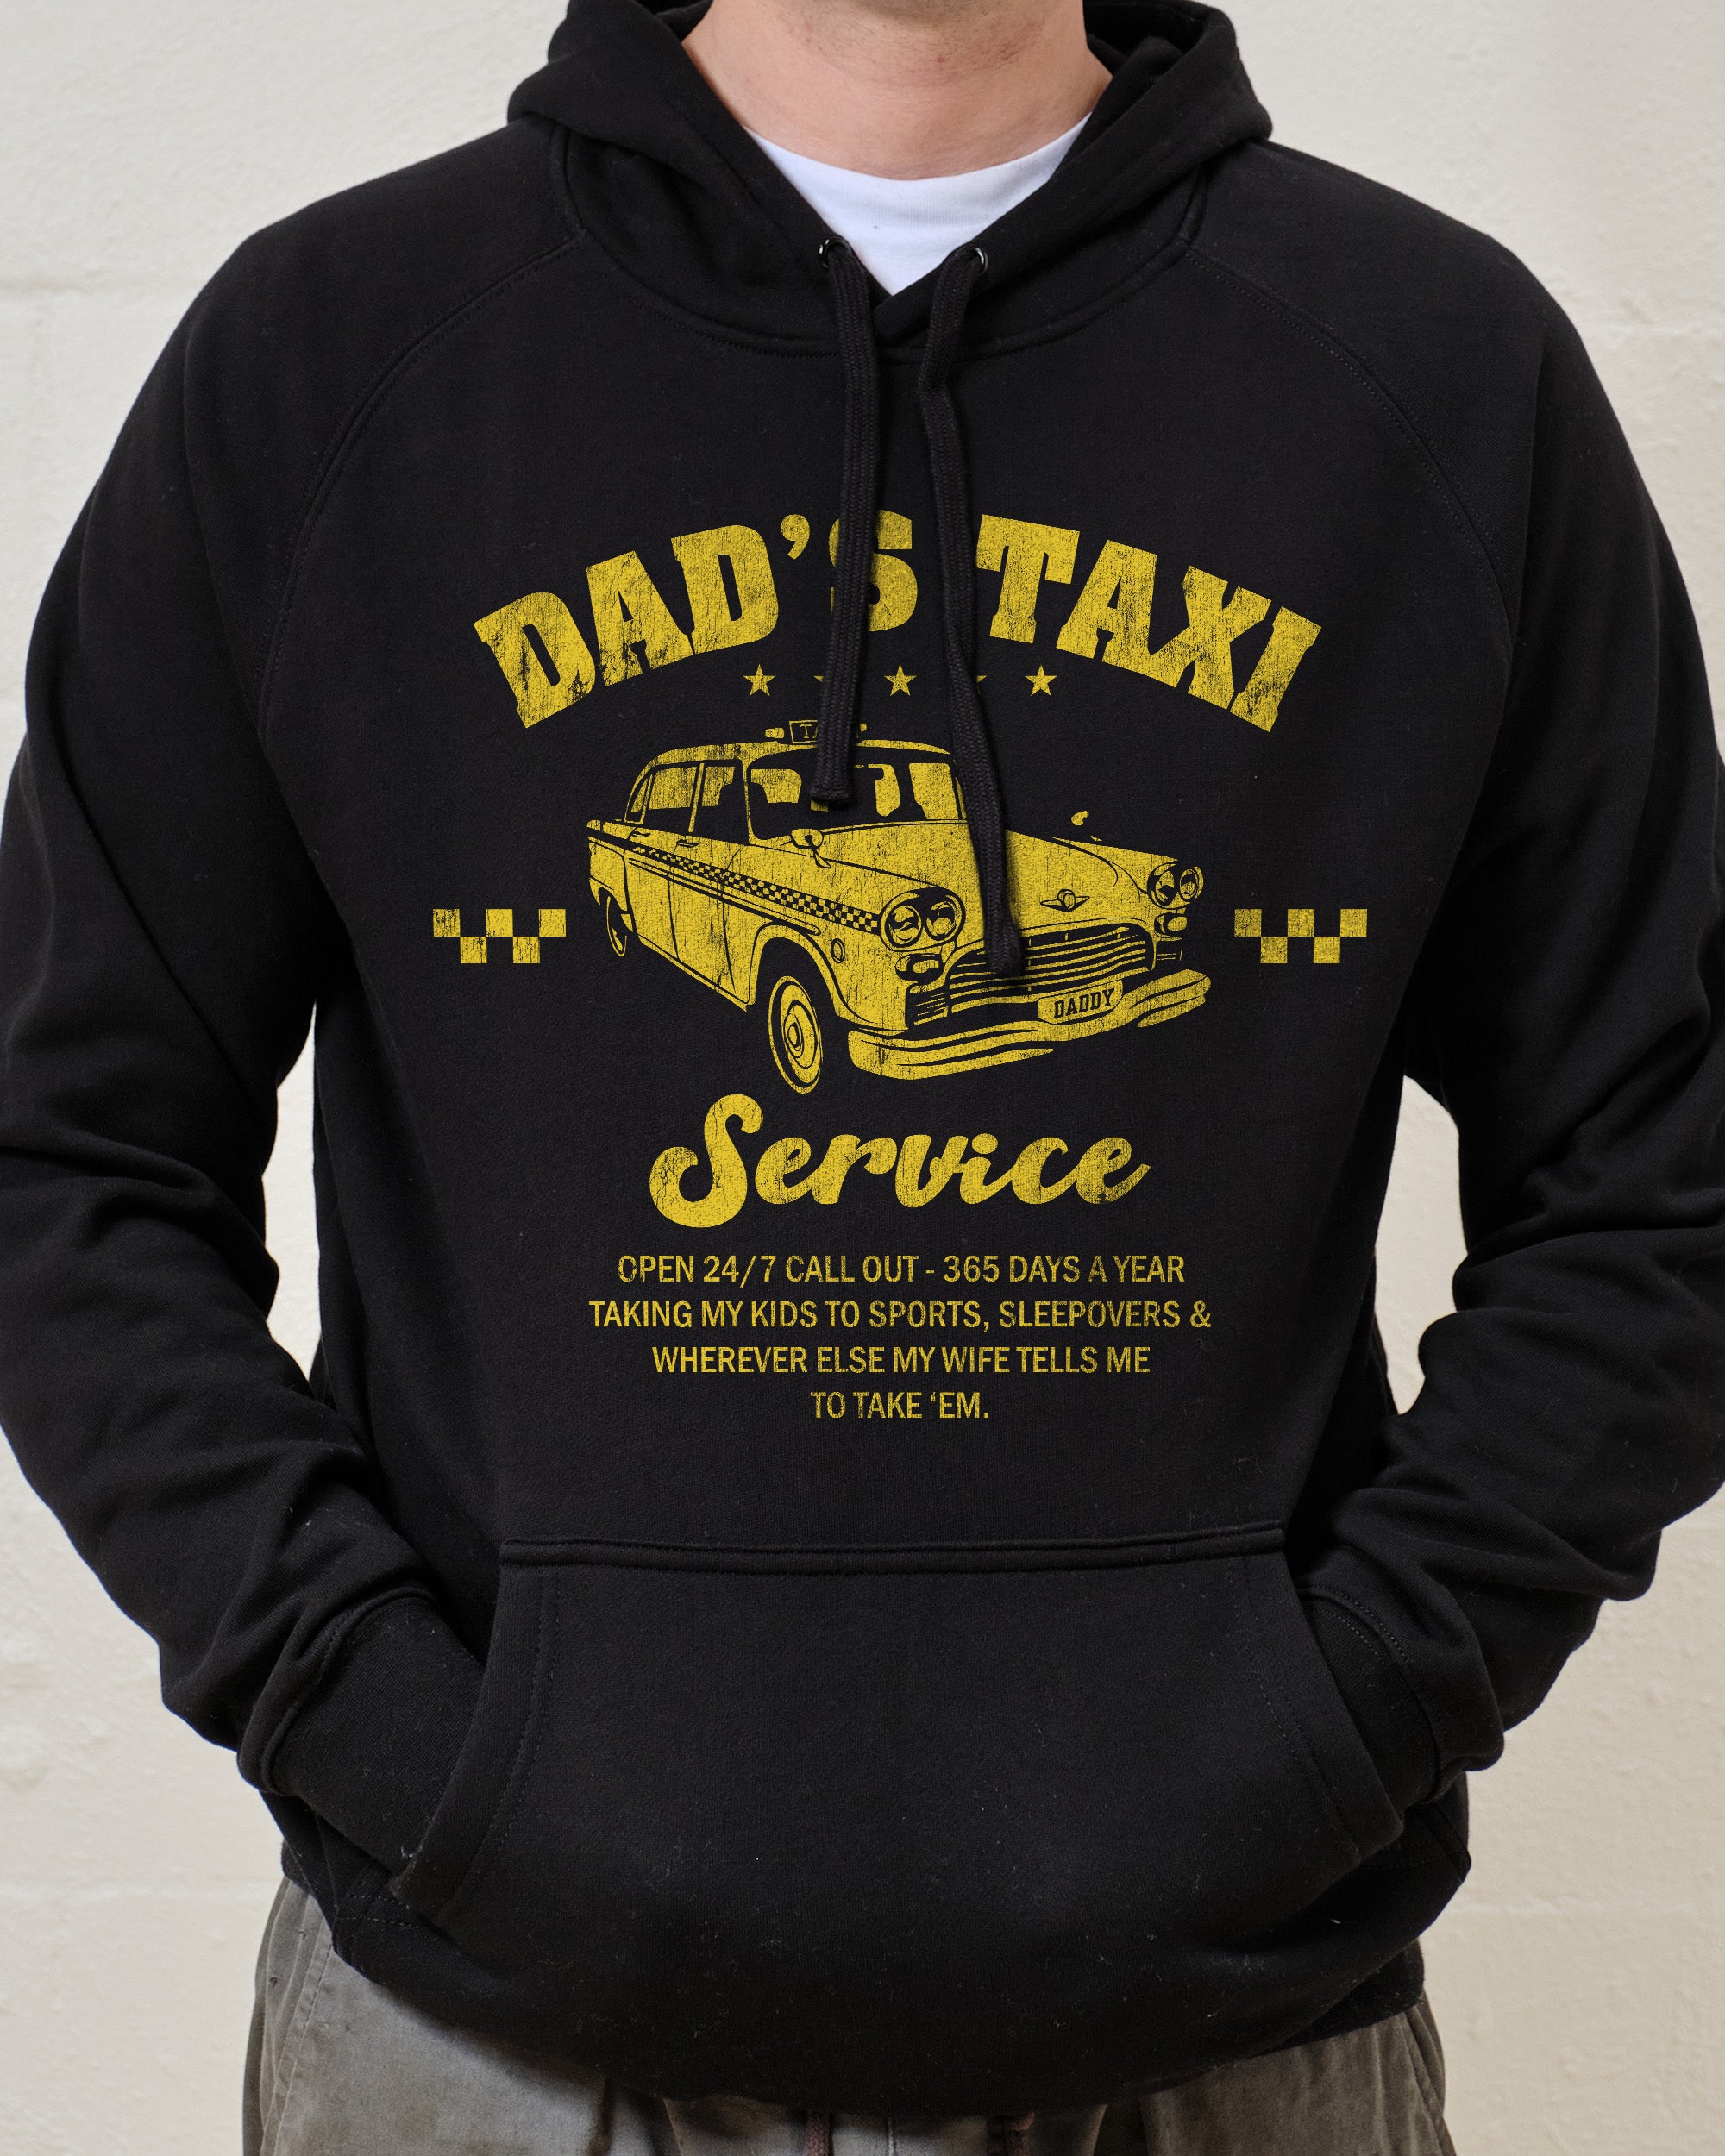 Dad's Taxi Service Hoodie